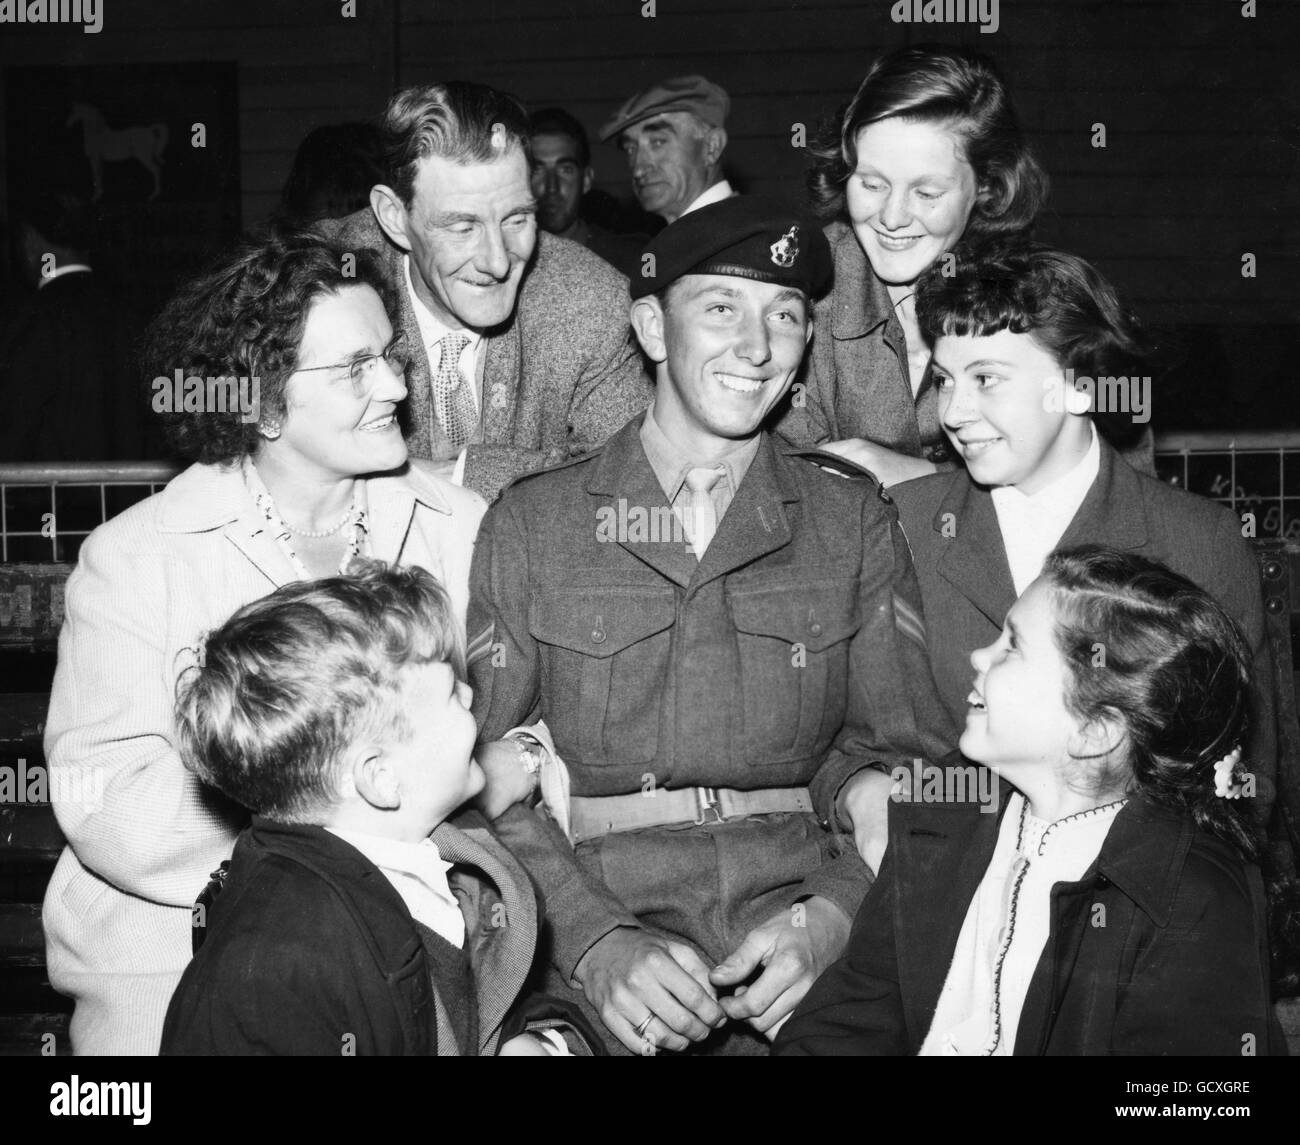 Centre of a family circle at Southampton is Corporal David Menzies, Royal Sussex Regiment, of Brighton, who arrived home in the Troopship Asturias after serving overseas for 14 months with his battalion of the Royal Sussex, the last British battalion to leave Korea. Greeting him are his mother (on left), his father, his sisters Irene 14 and Wendy 11, his brother John, aged 9, and (holding his arm on right) his girlfriend, Sybil Rogers. David and Sybil are about to become engaged. Stock Photo